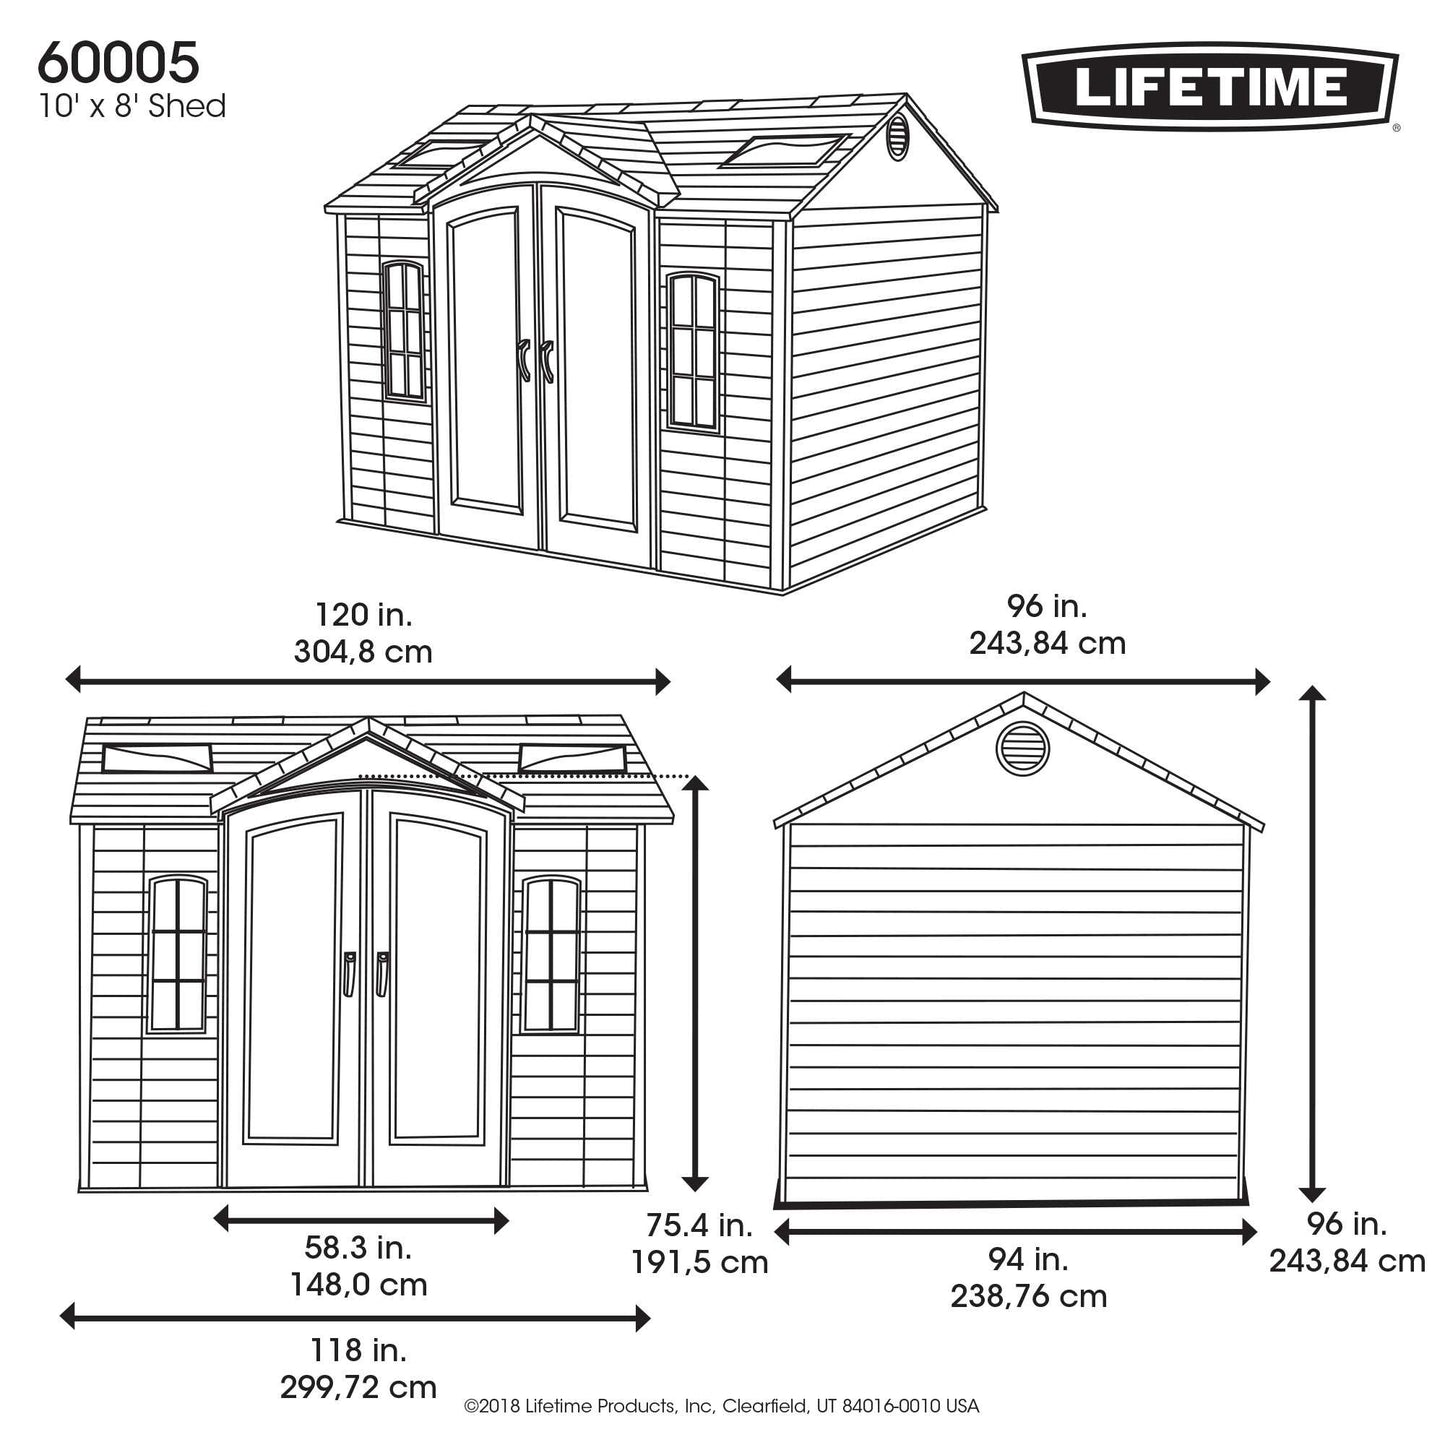 Lifetime 10 x 8' Outdoor Storage Shed